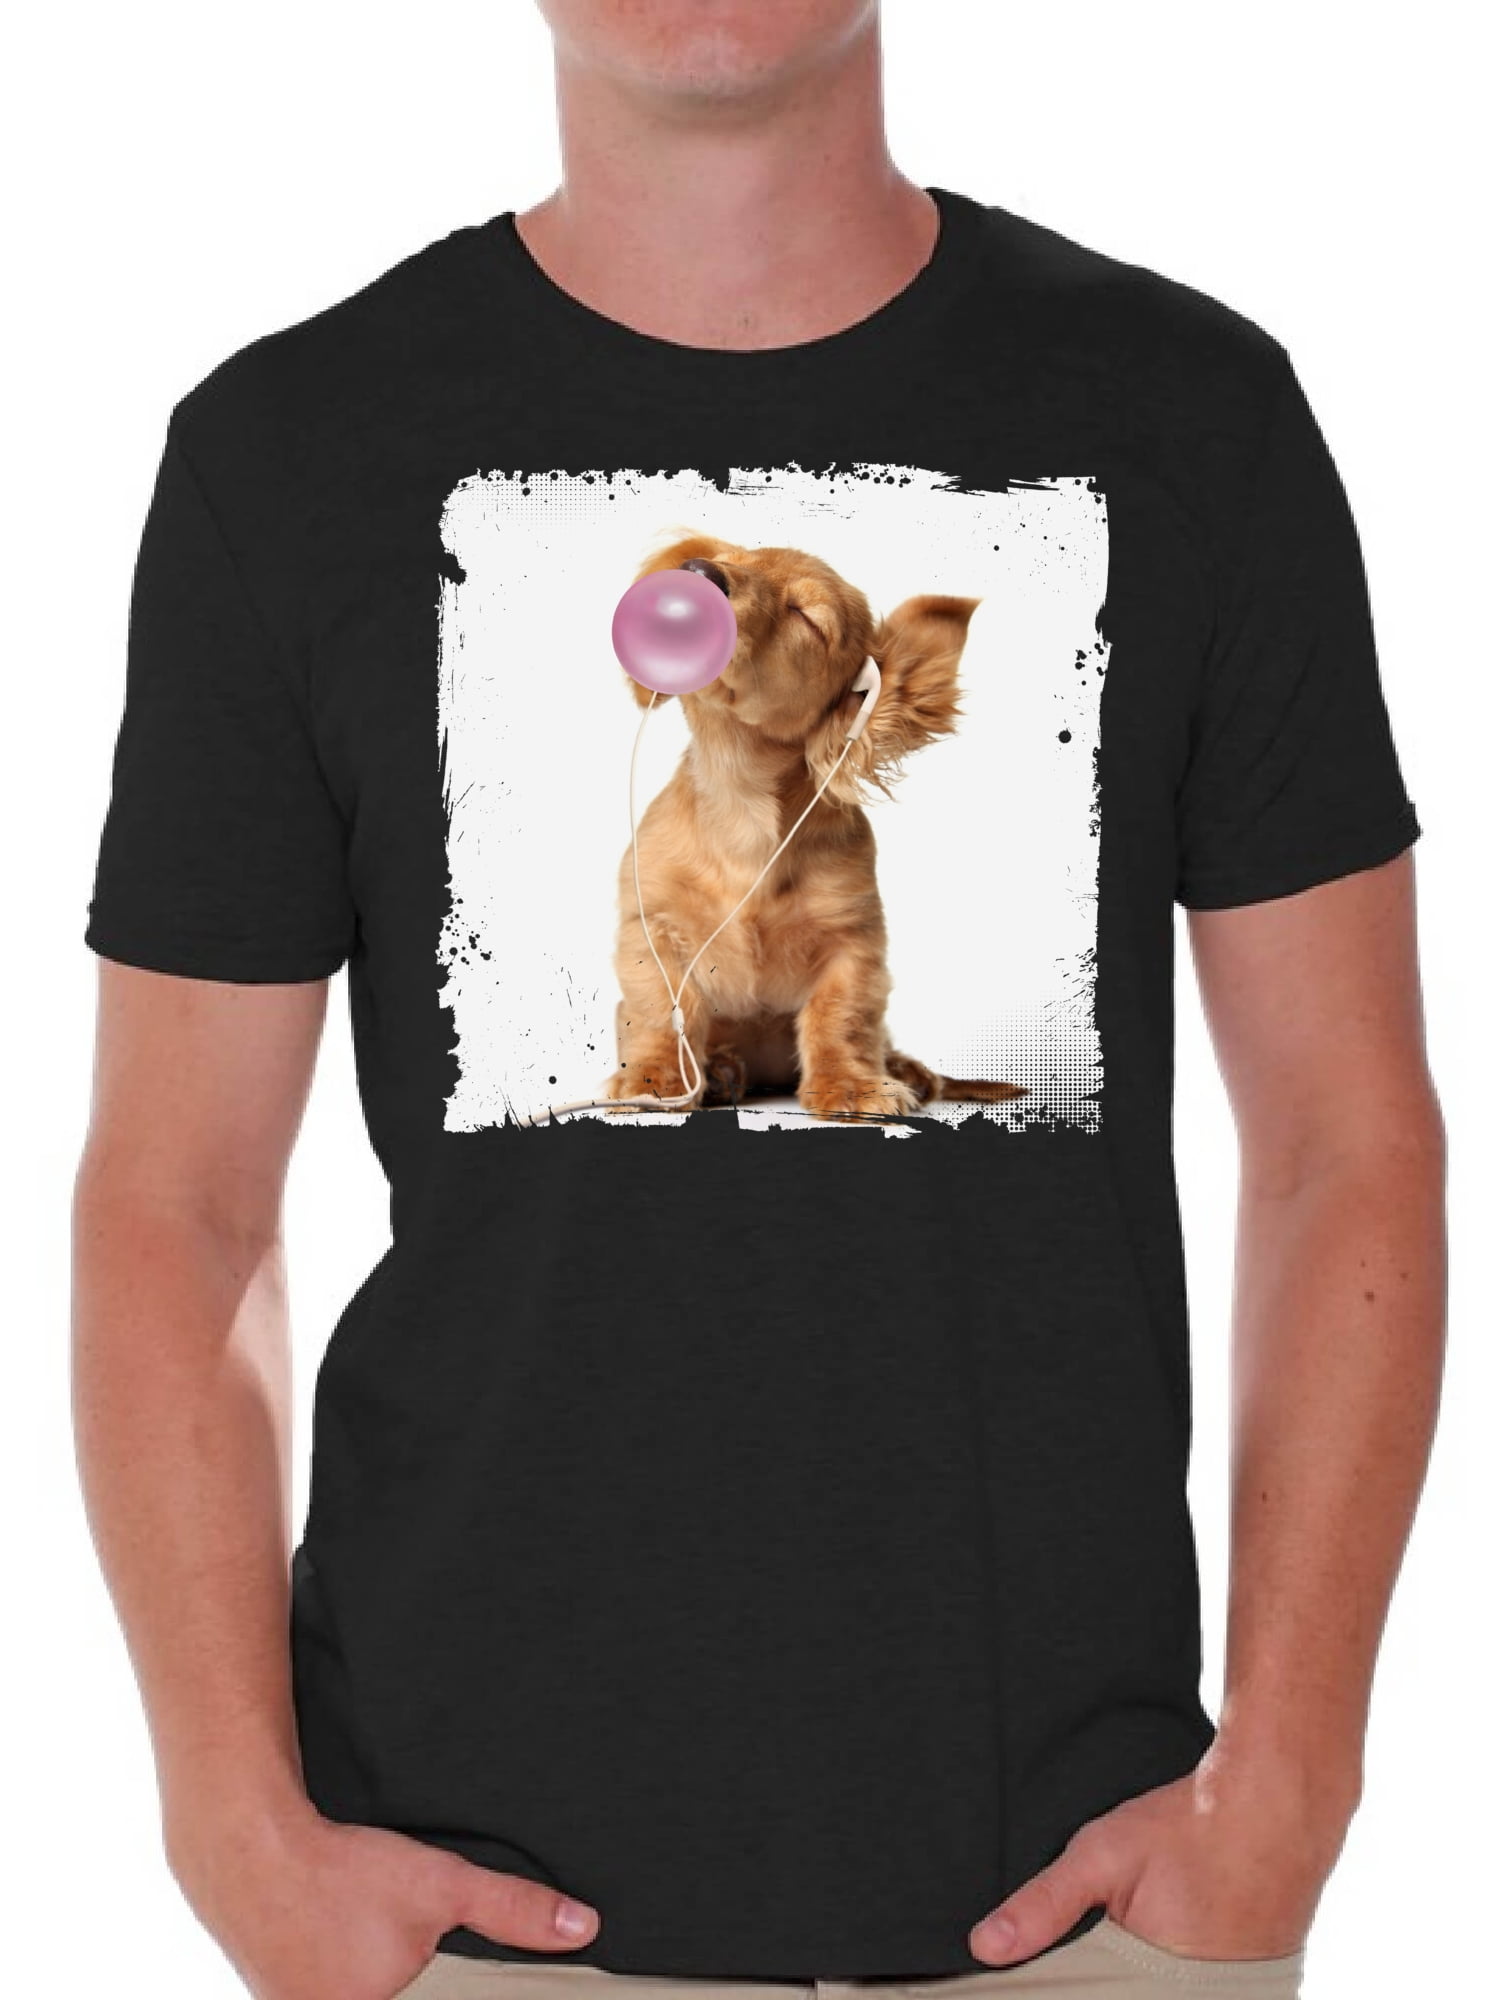 Awkward Styles Dog Tshirt Cute Puppy Shirt Funny Animal Gifts Puppy with Pink Gum T Shirt Dog Clothing Animal T-Shirt for Men Funny Animal Gifts DogT Shirt Cute Animal T